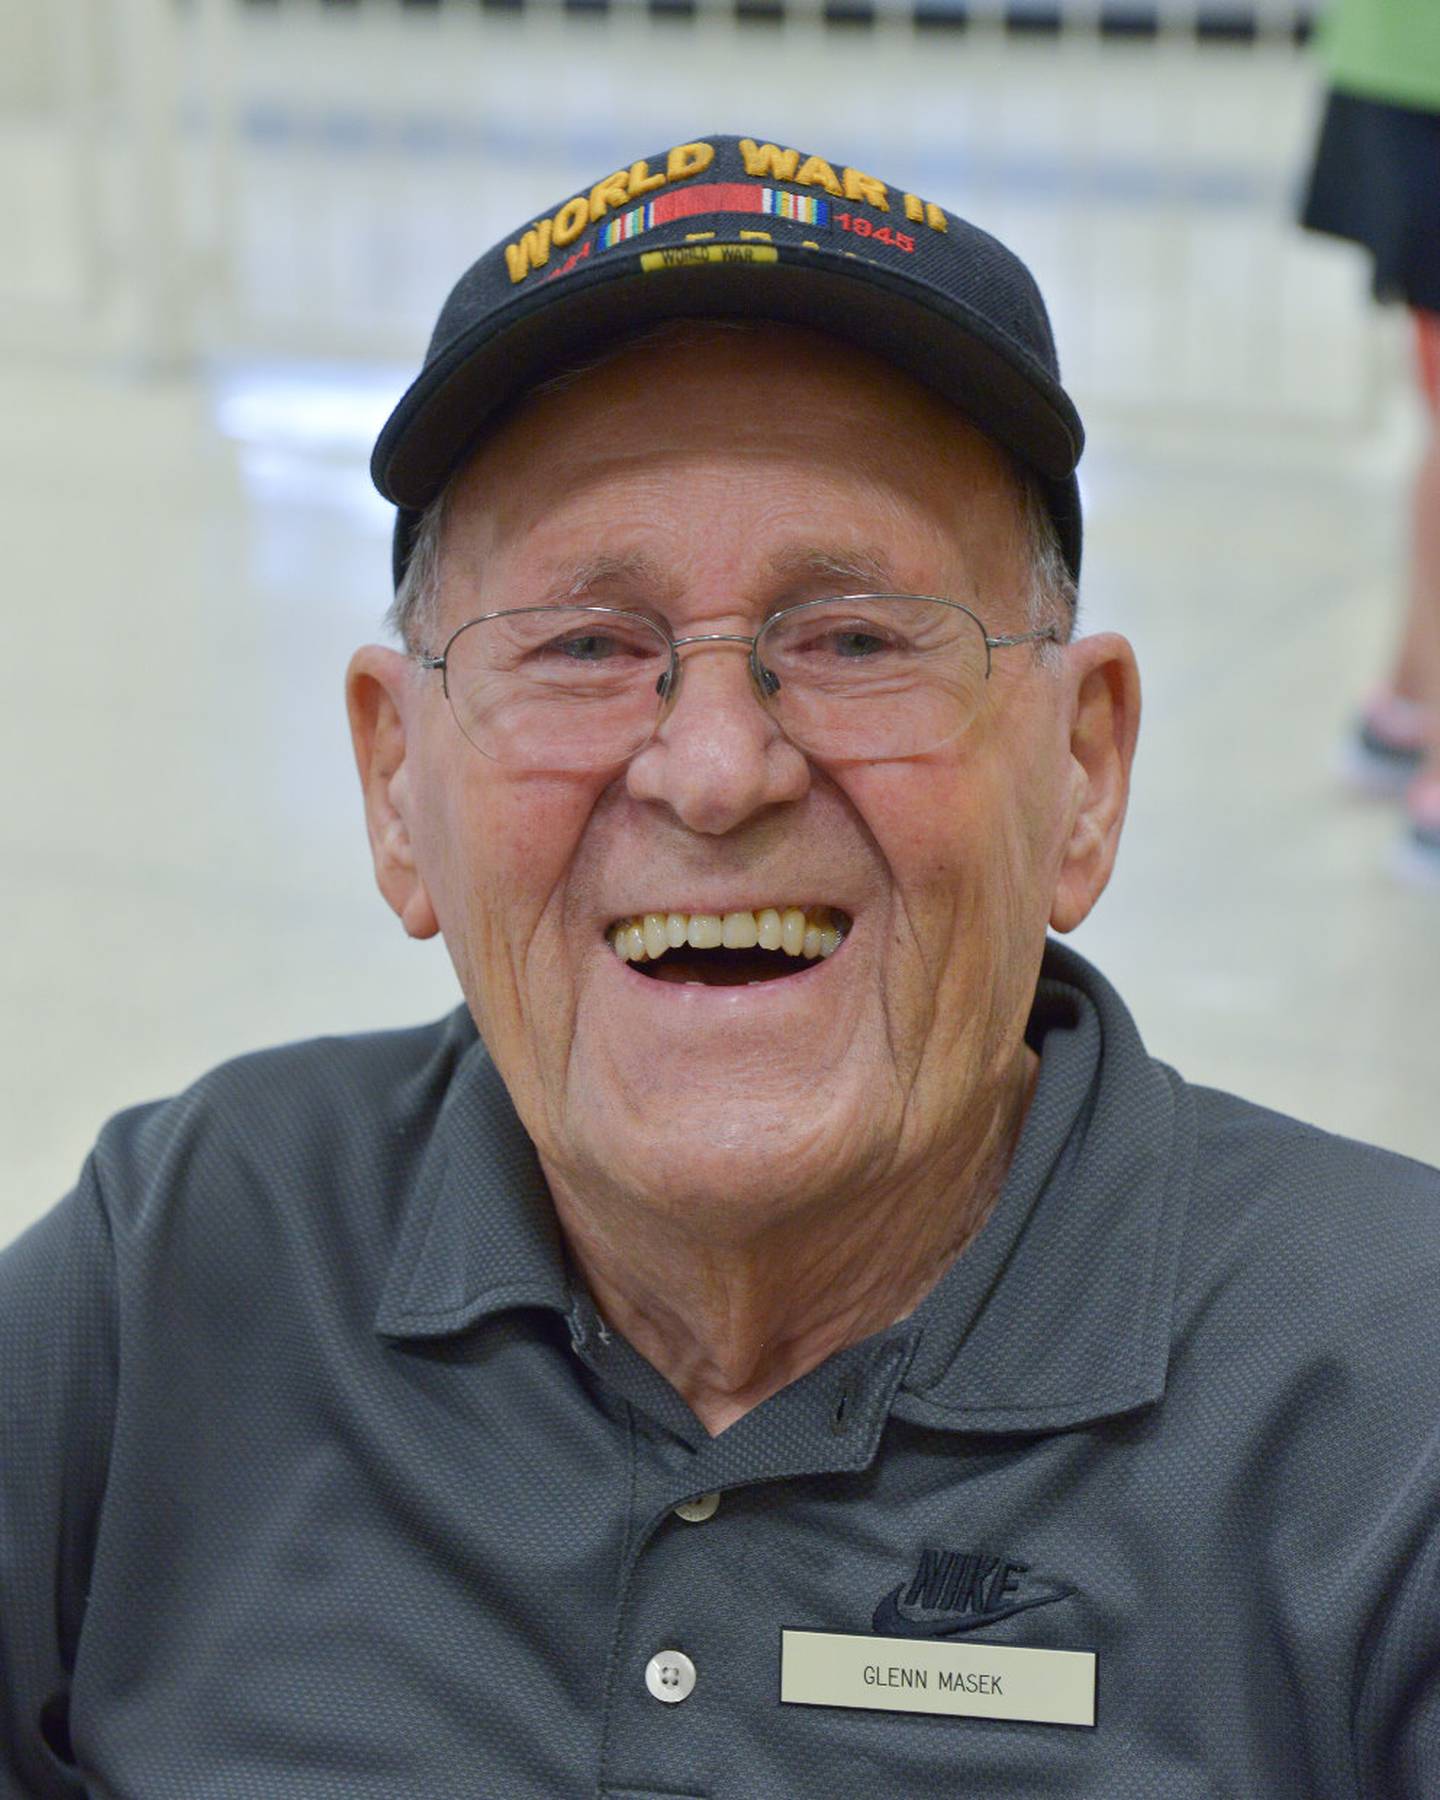 In August 2016, Glenn Masek participated in what he described as one of the most memorable and moving experiences of his life --- an Honor Flight to Washington, D.C., where Glenn and his fellow veterans were given a tour of the nation’s capital and its landmarks.